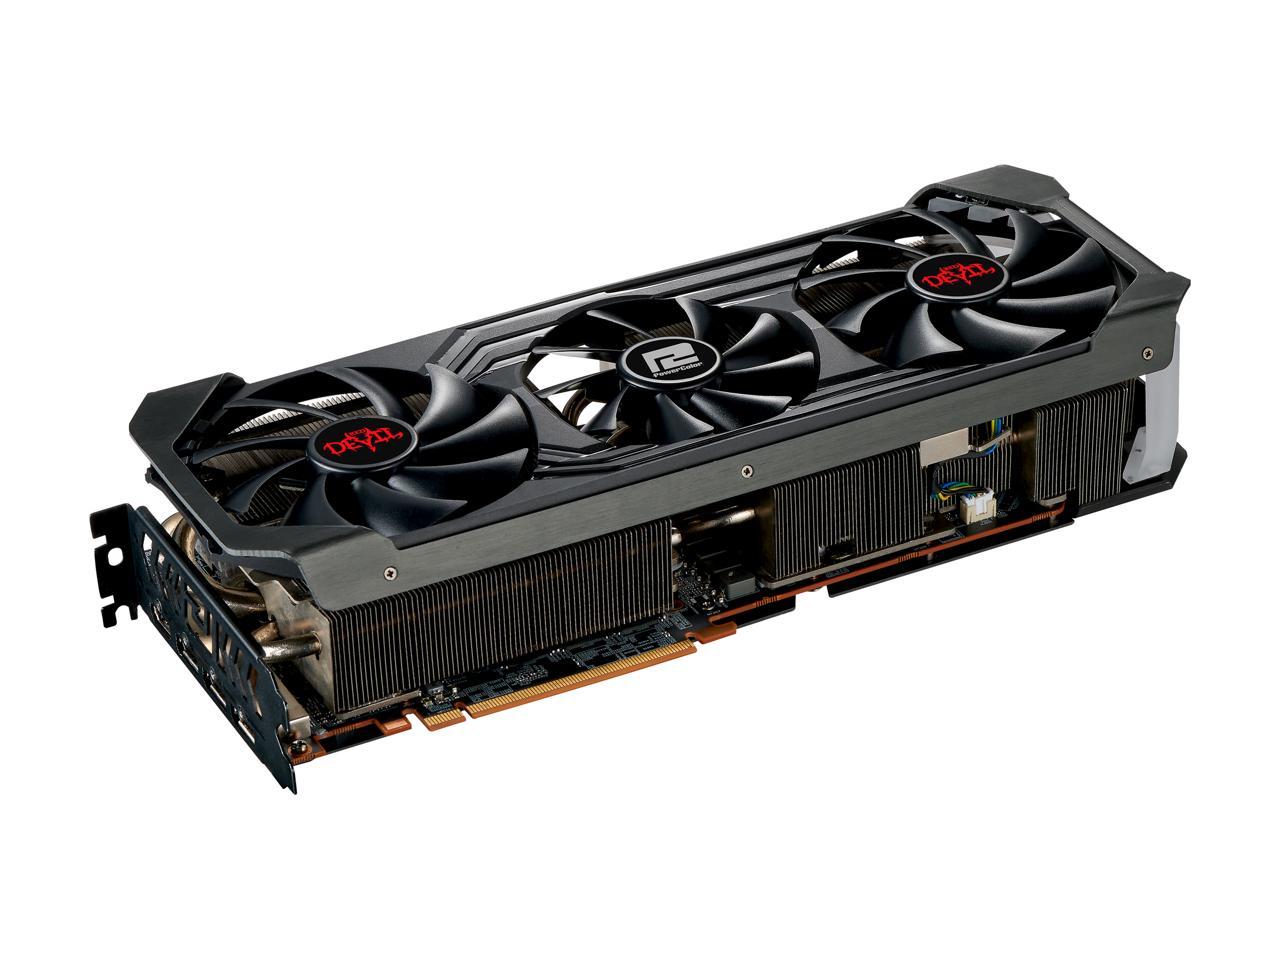 PowerColor Red Devil AMD Radeon RX 6900 XT Ultimate Gaming Graphics Card with 16GB GDDR6 Memory, Powered by AMD RDNA 2, HDMI 2.1 (AXRX 6900XTU 16GBD6-3DHE/OC)